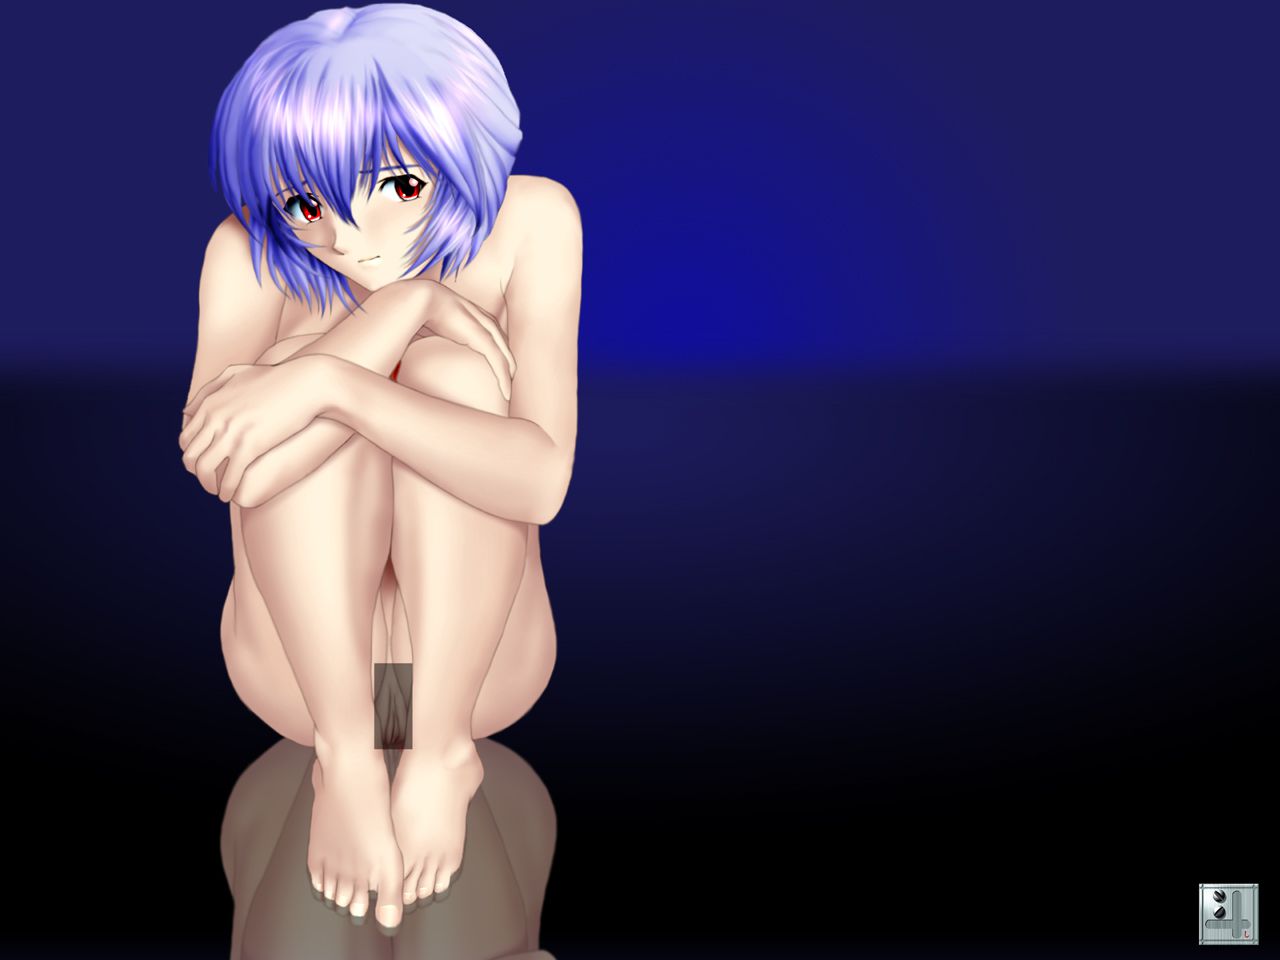 [yadorigi] The sight which was being made into the secret until now Rei ayanami 2